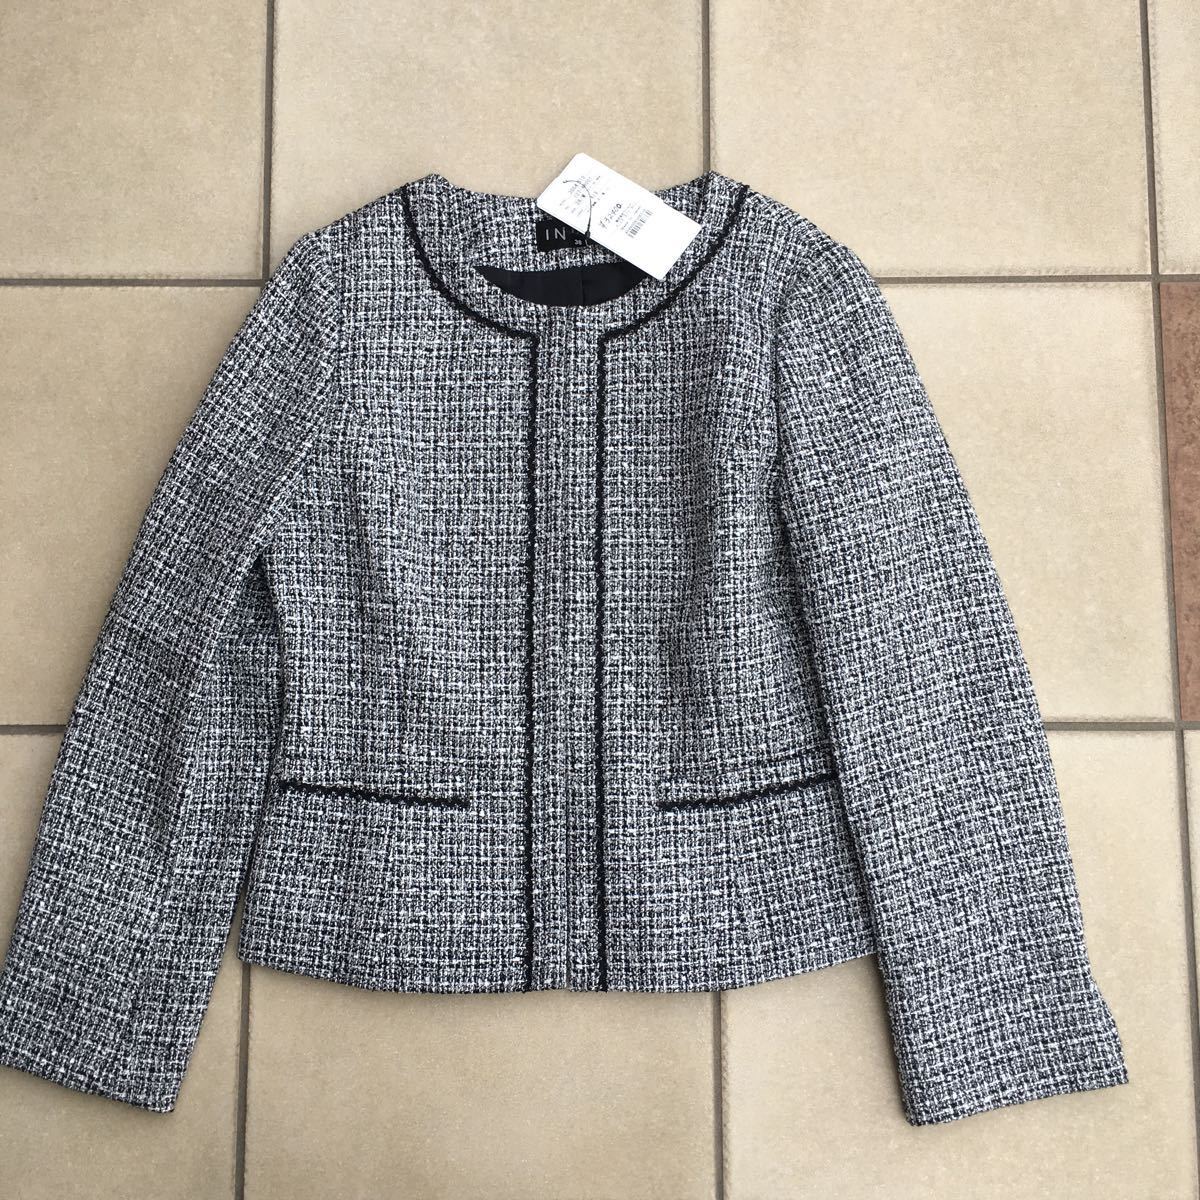  new goods tag not yet arrived Indivi INDIVI mama suit go in ./ graduation ceremony ornament tweed jacket size 38 black, gray made in Japan regular price,30.000+ tax 